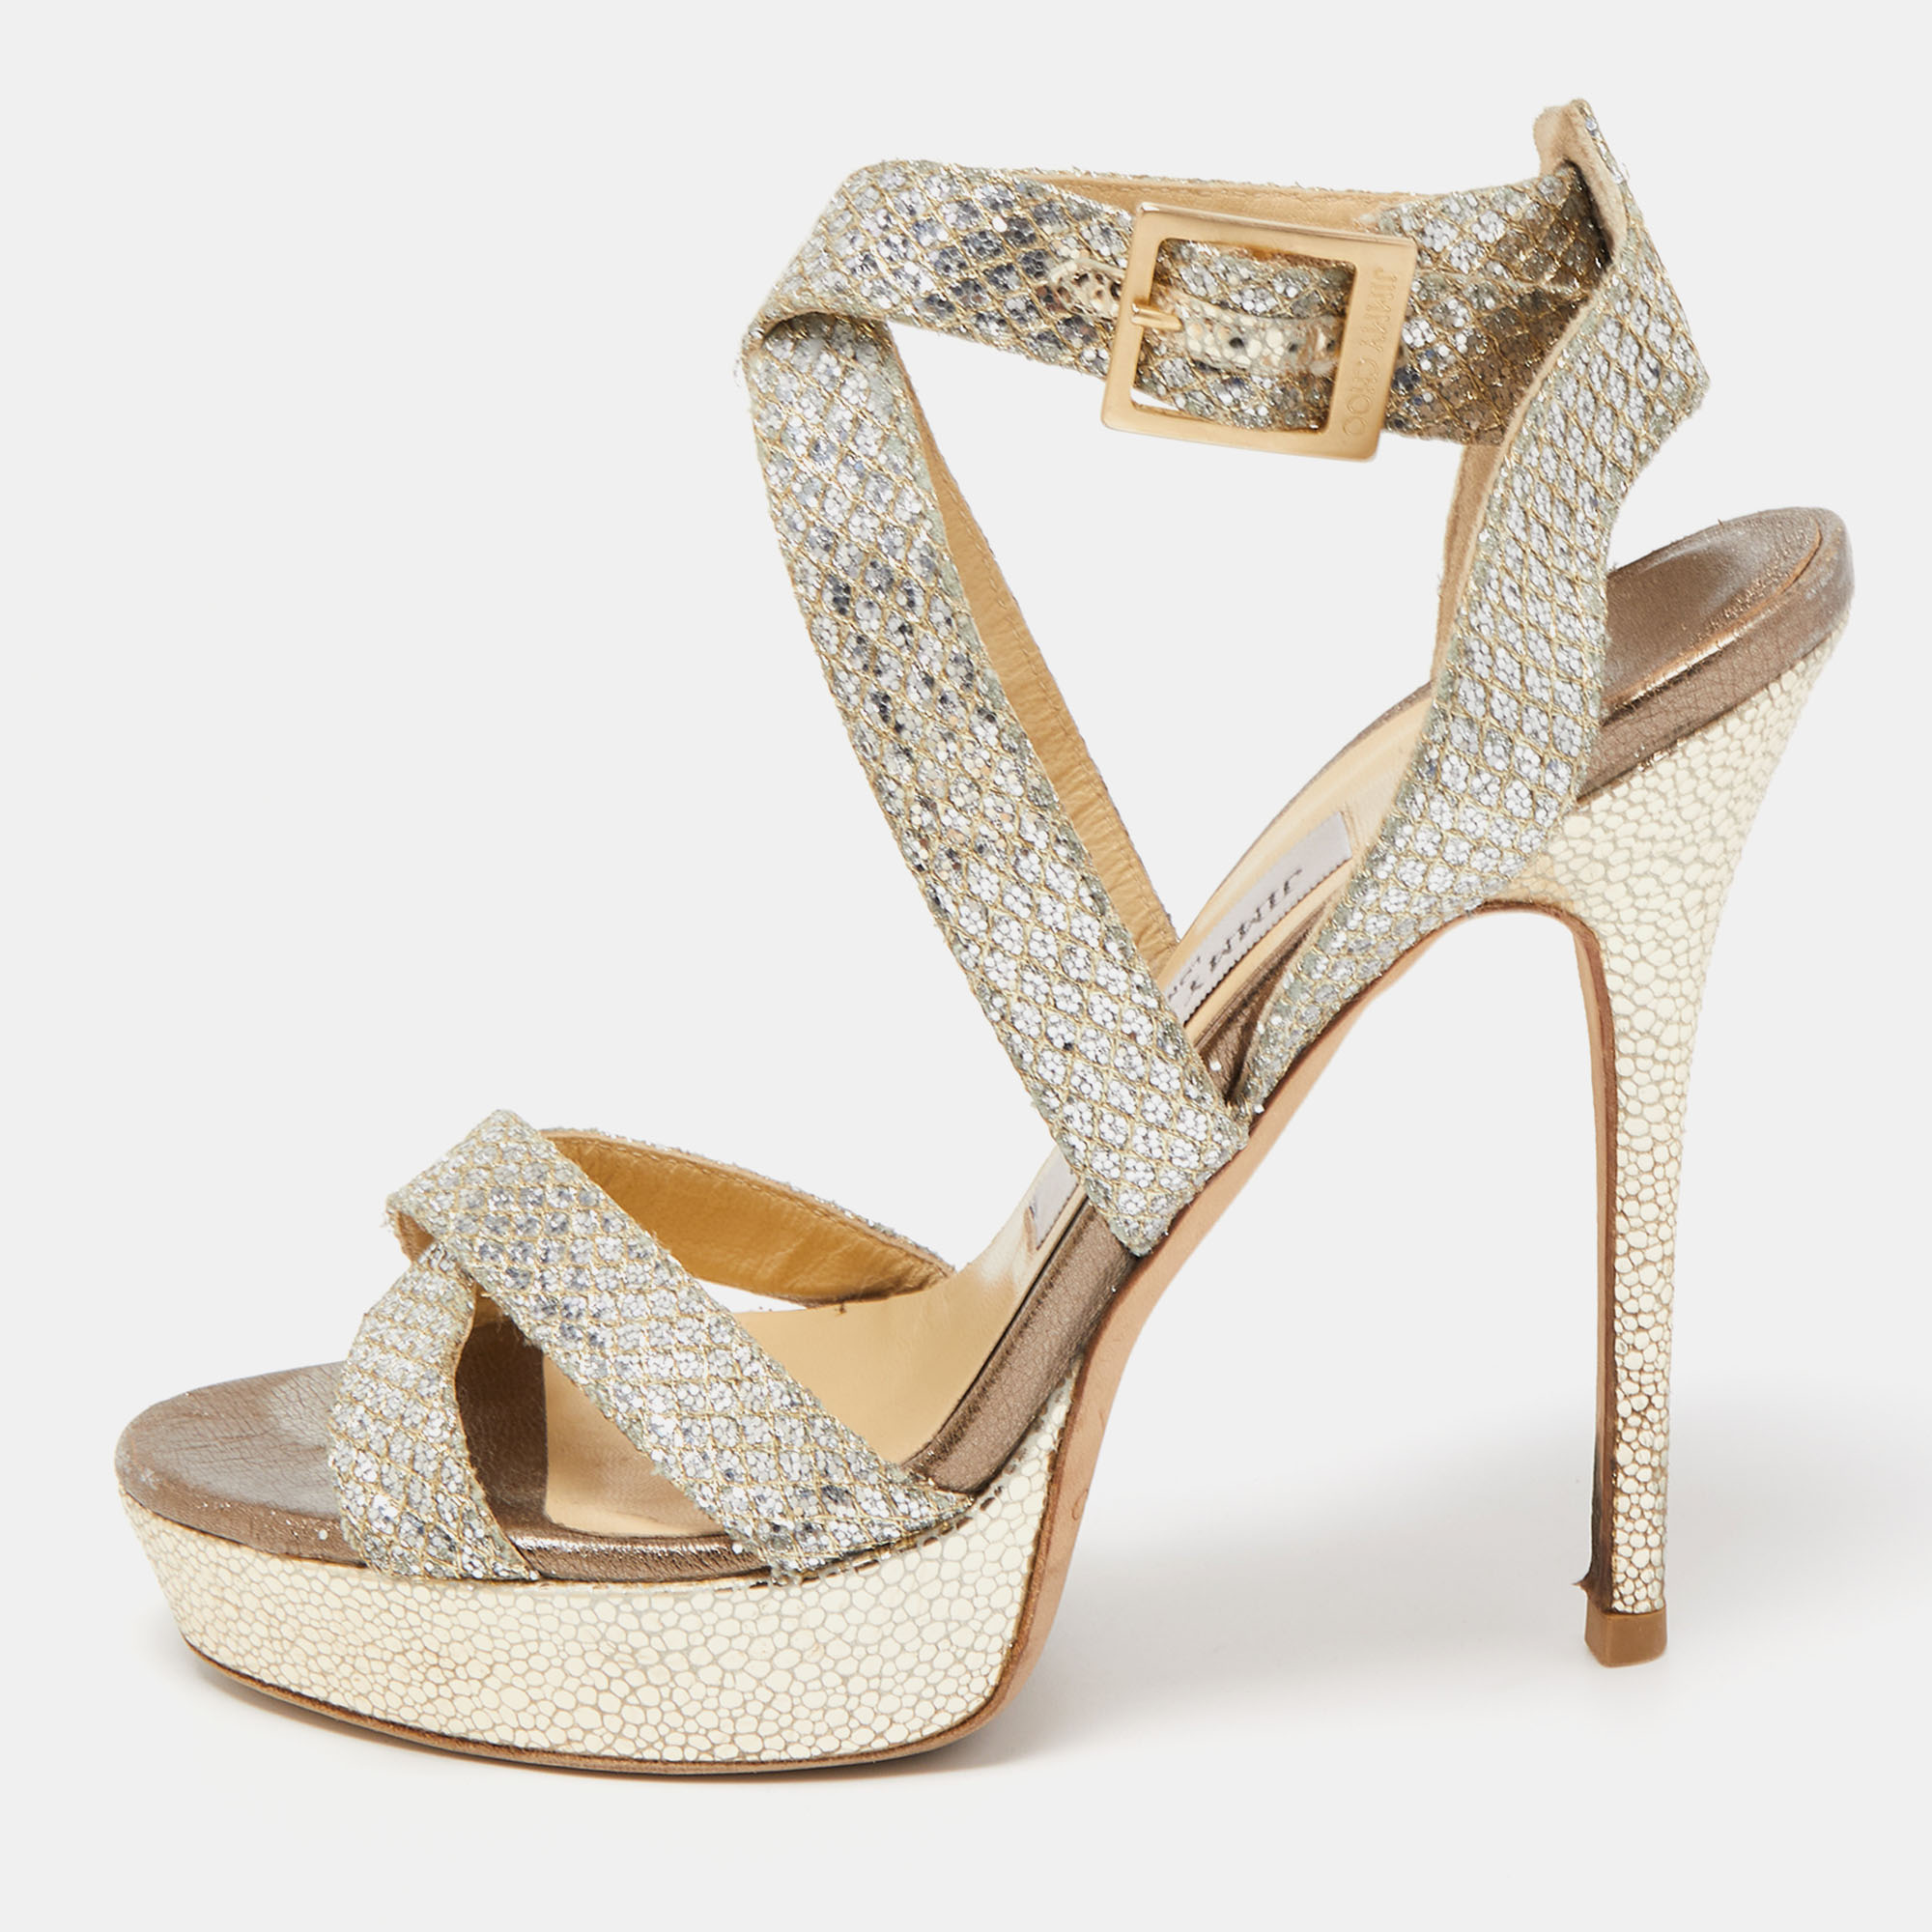 Pre-owned Jimmy Choo Silver Glitter Vamp Ankle Strap Sandals Size 38